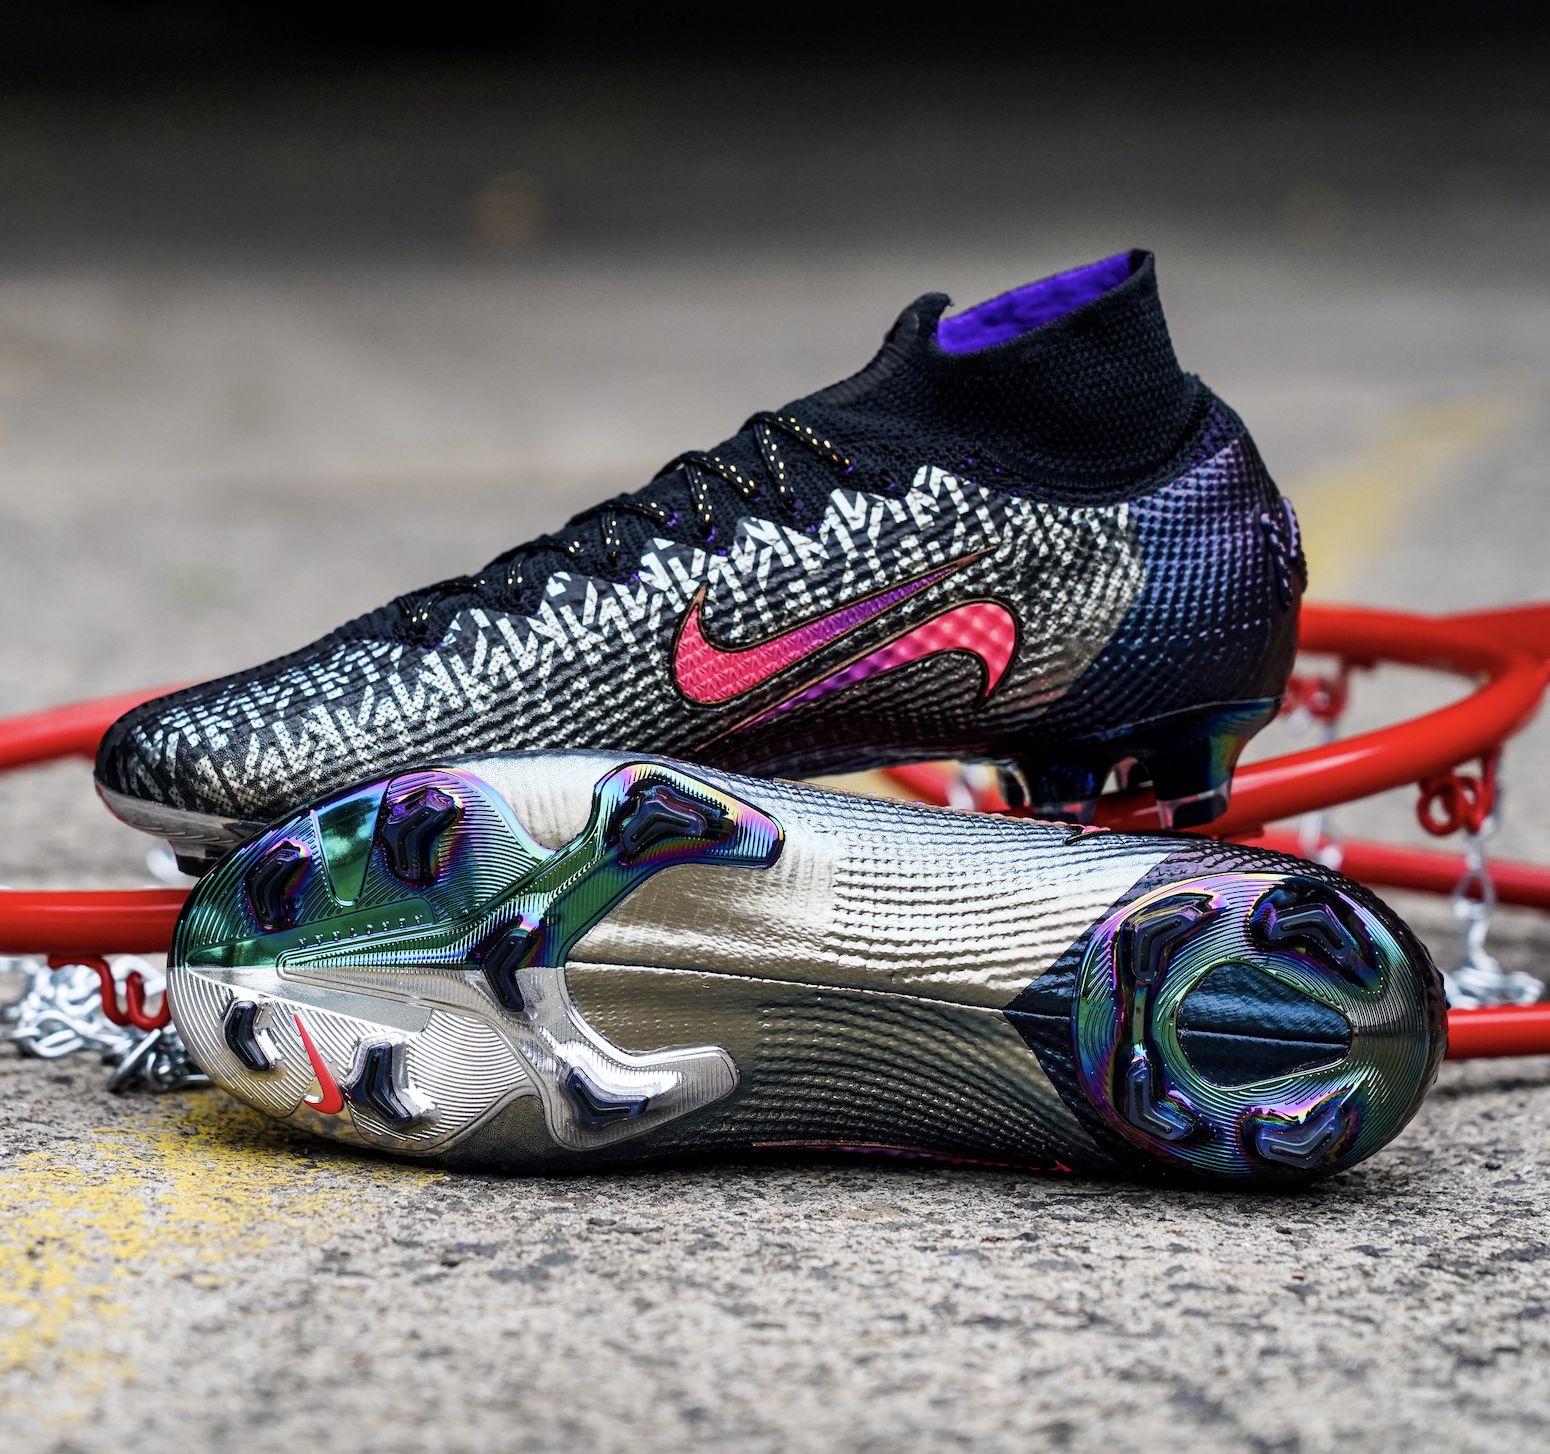 Should Nike be WORRIED about these new football boots? 